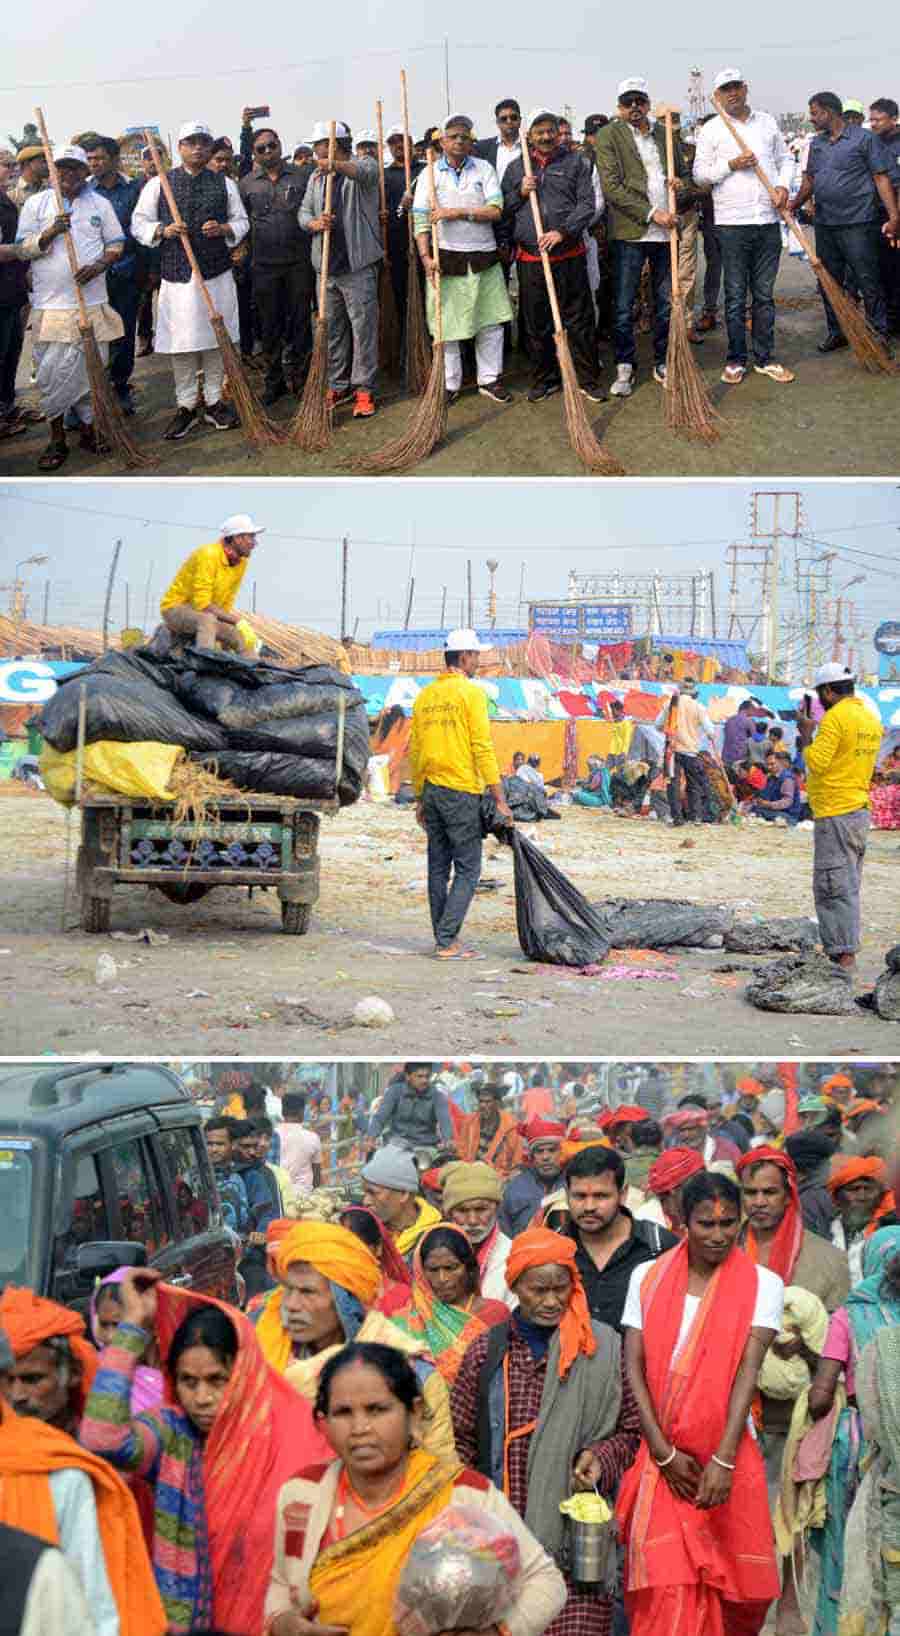 Cleaning spree at Gangasagar Mela venue after the mega event concluded. (Bottom) Pilgrims on their way back on Monday 